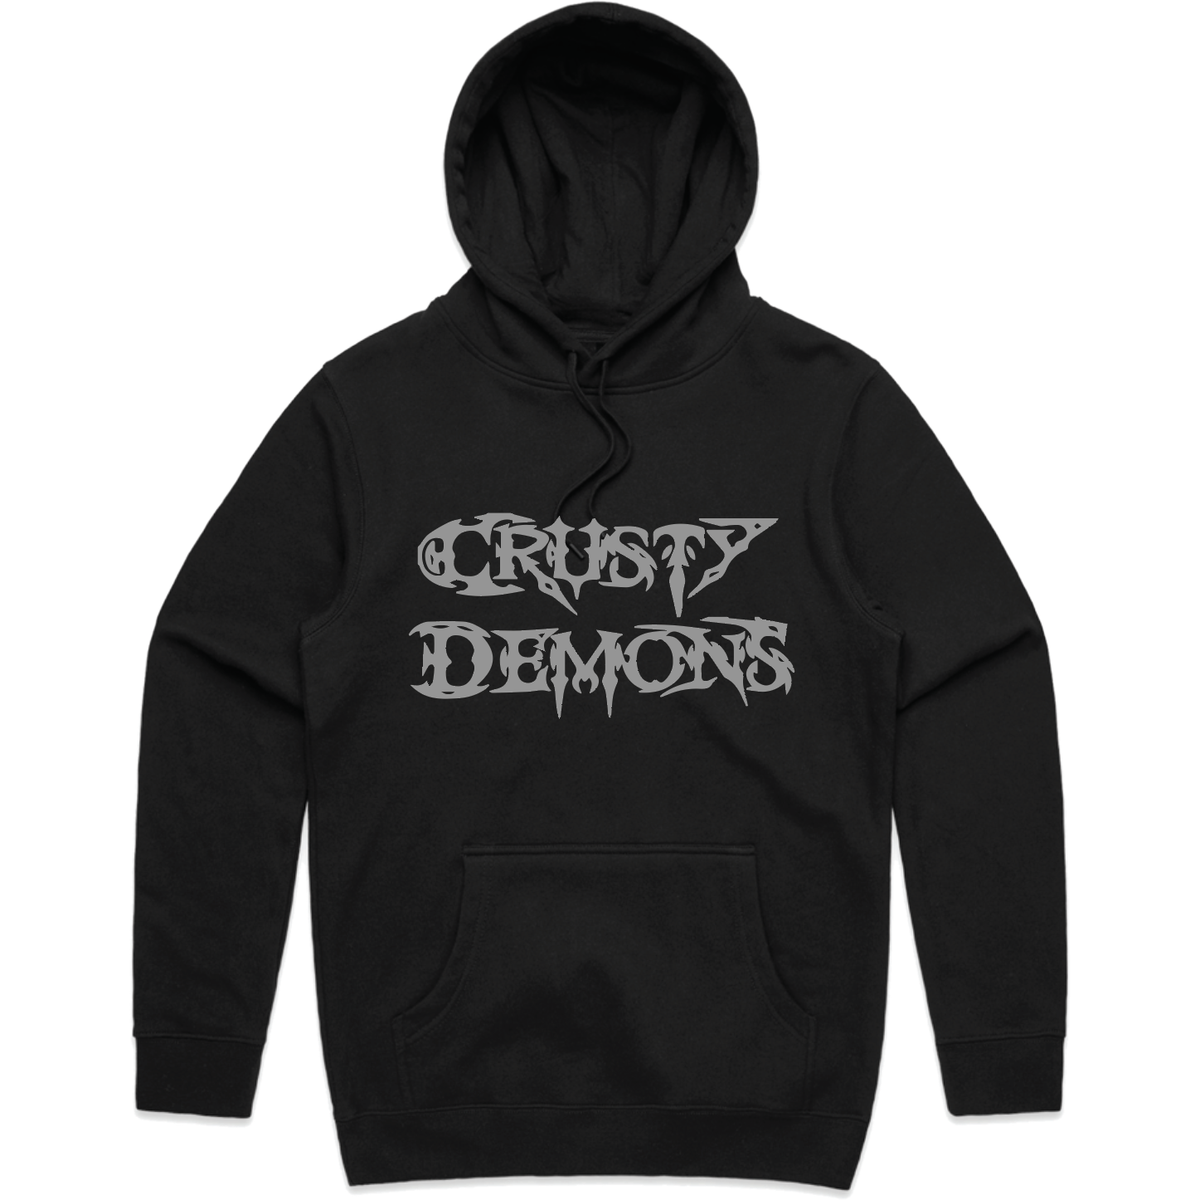 CRUSTY-DEMONS-Men's-Knit-Hooded-Pullover-Blade - PULLOVER HOODIE - Synik Clothing - synikclothing.com